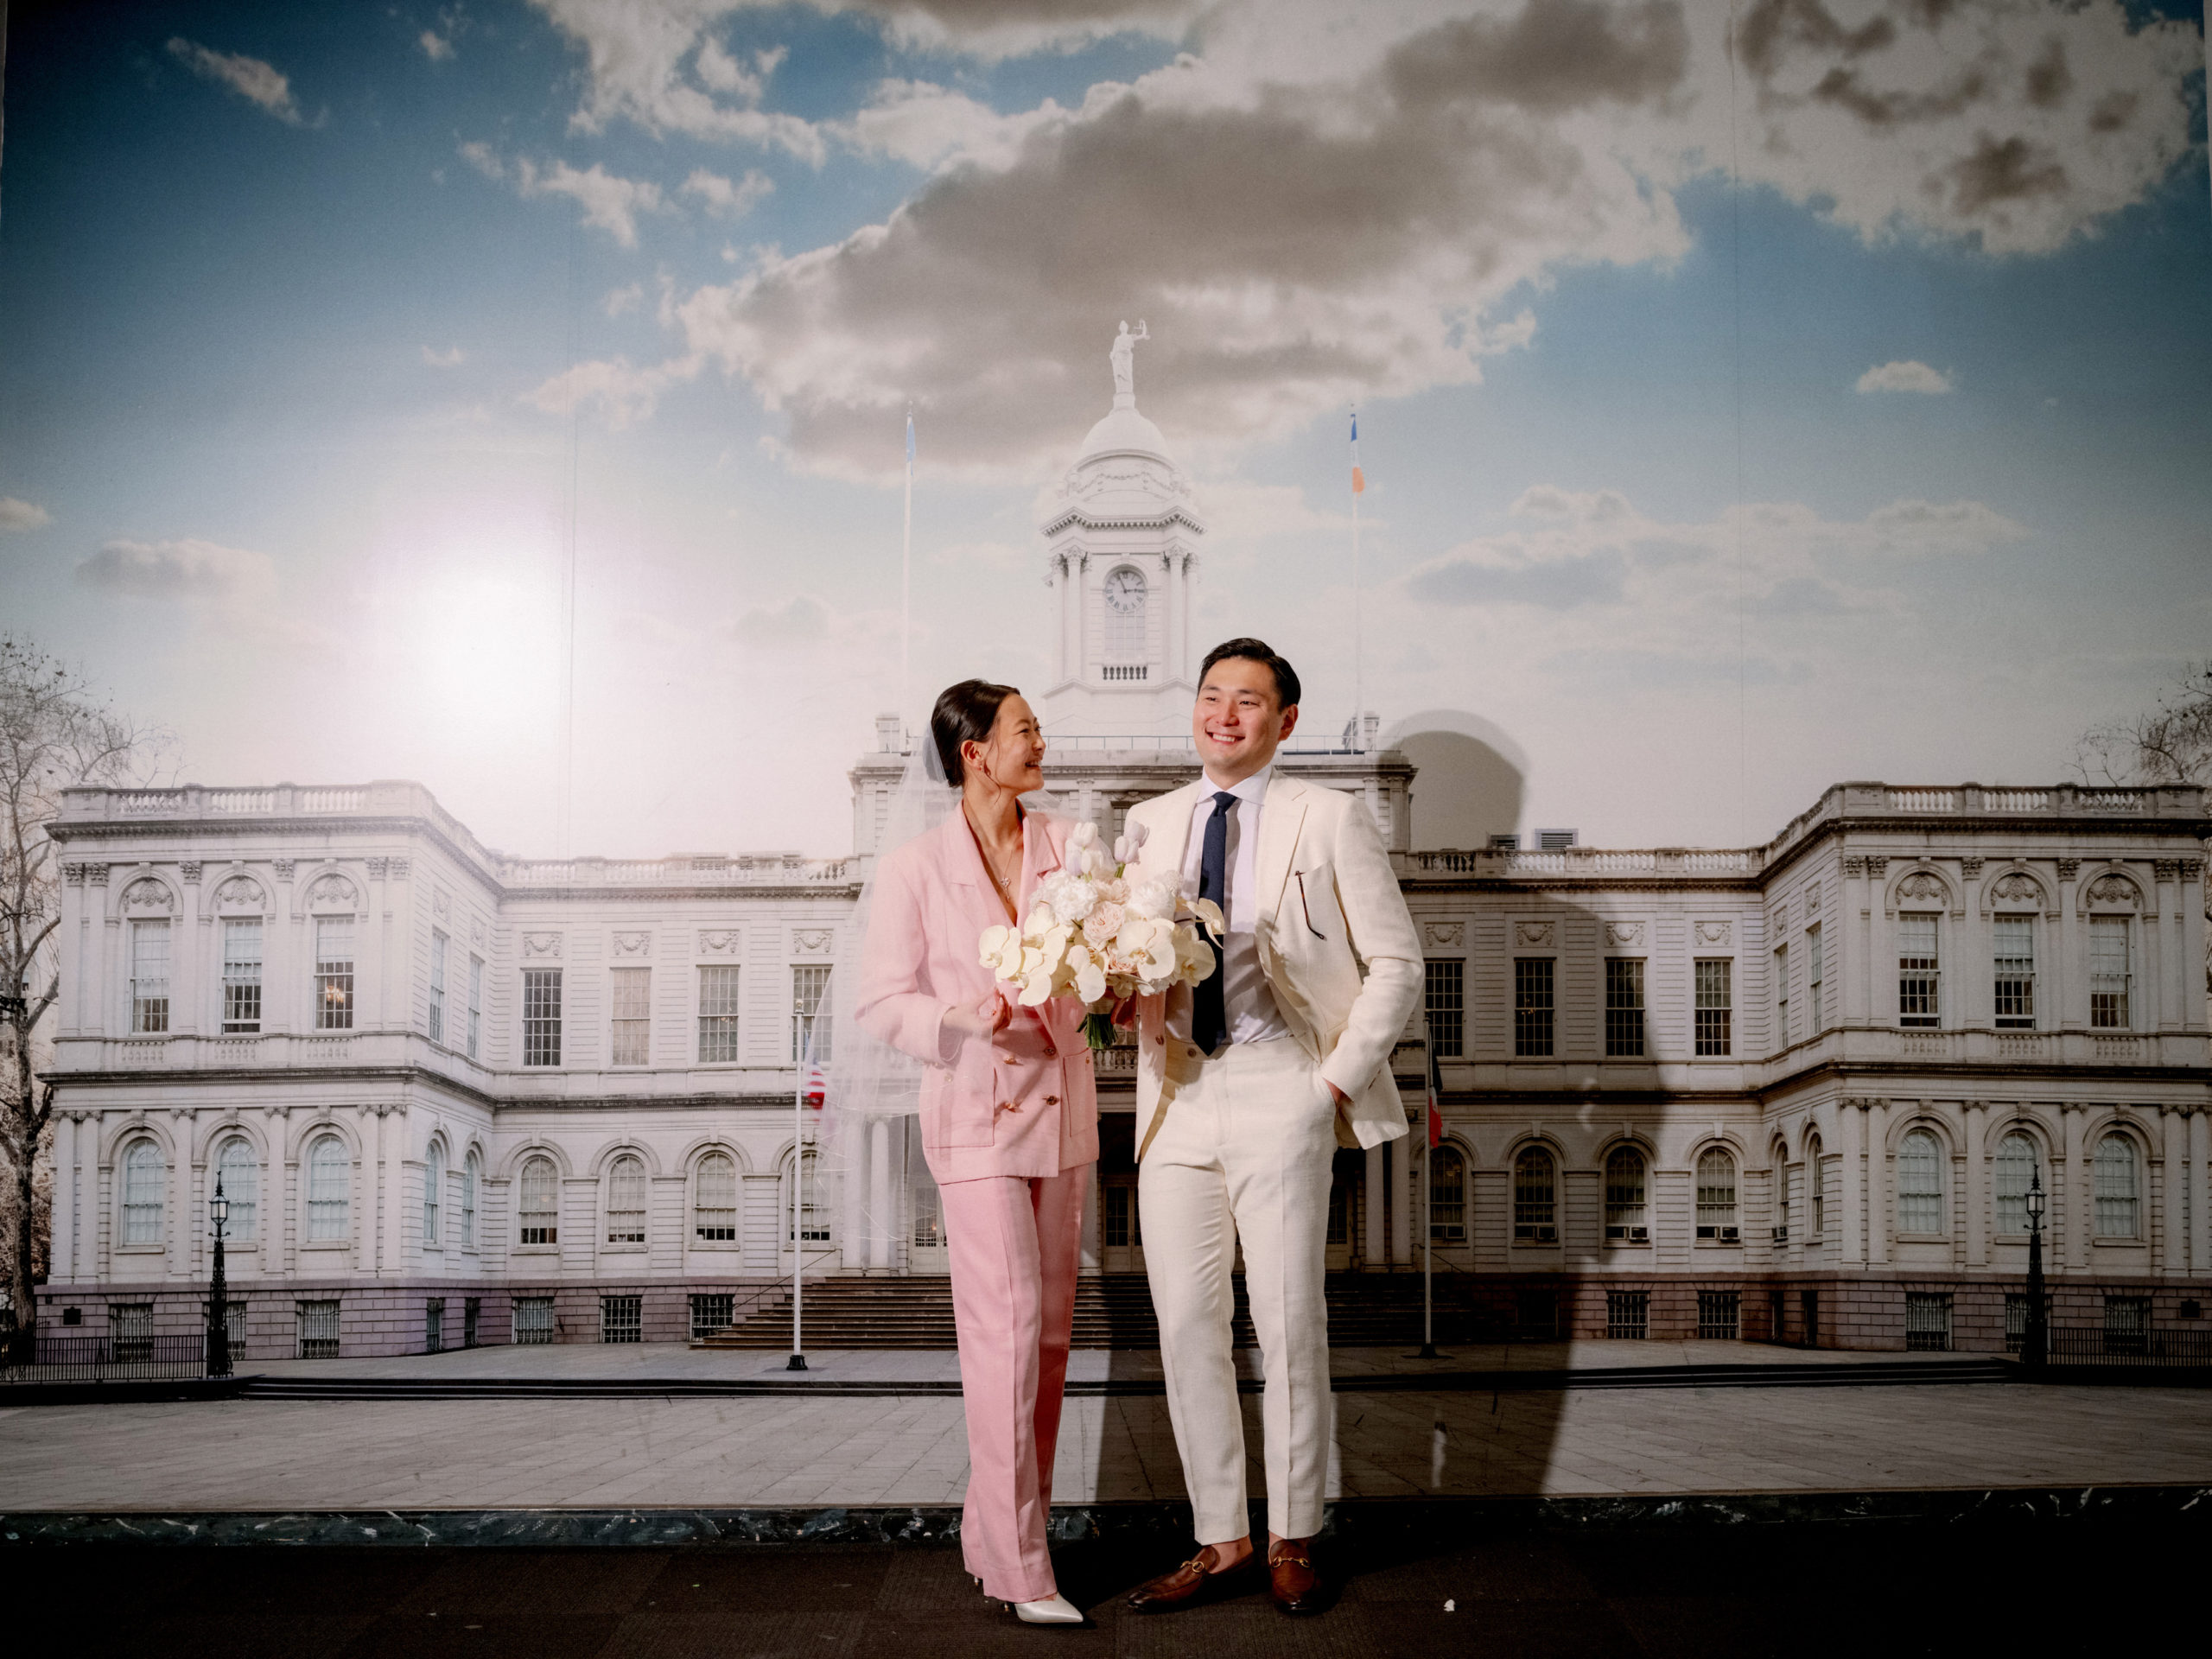 The newlyweds are laughing together, with a NYC City Hall photo in the background. Editorial elopement Image by Jenny Fu Studio